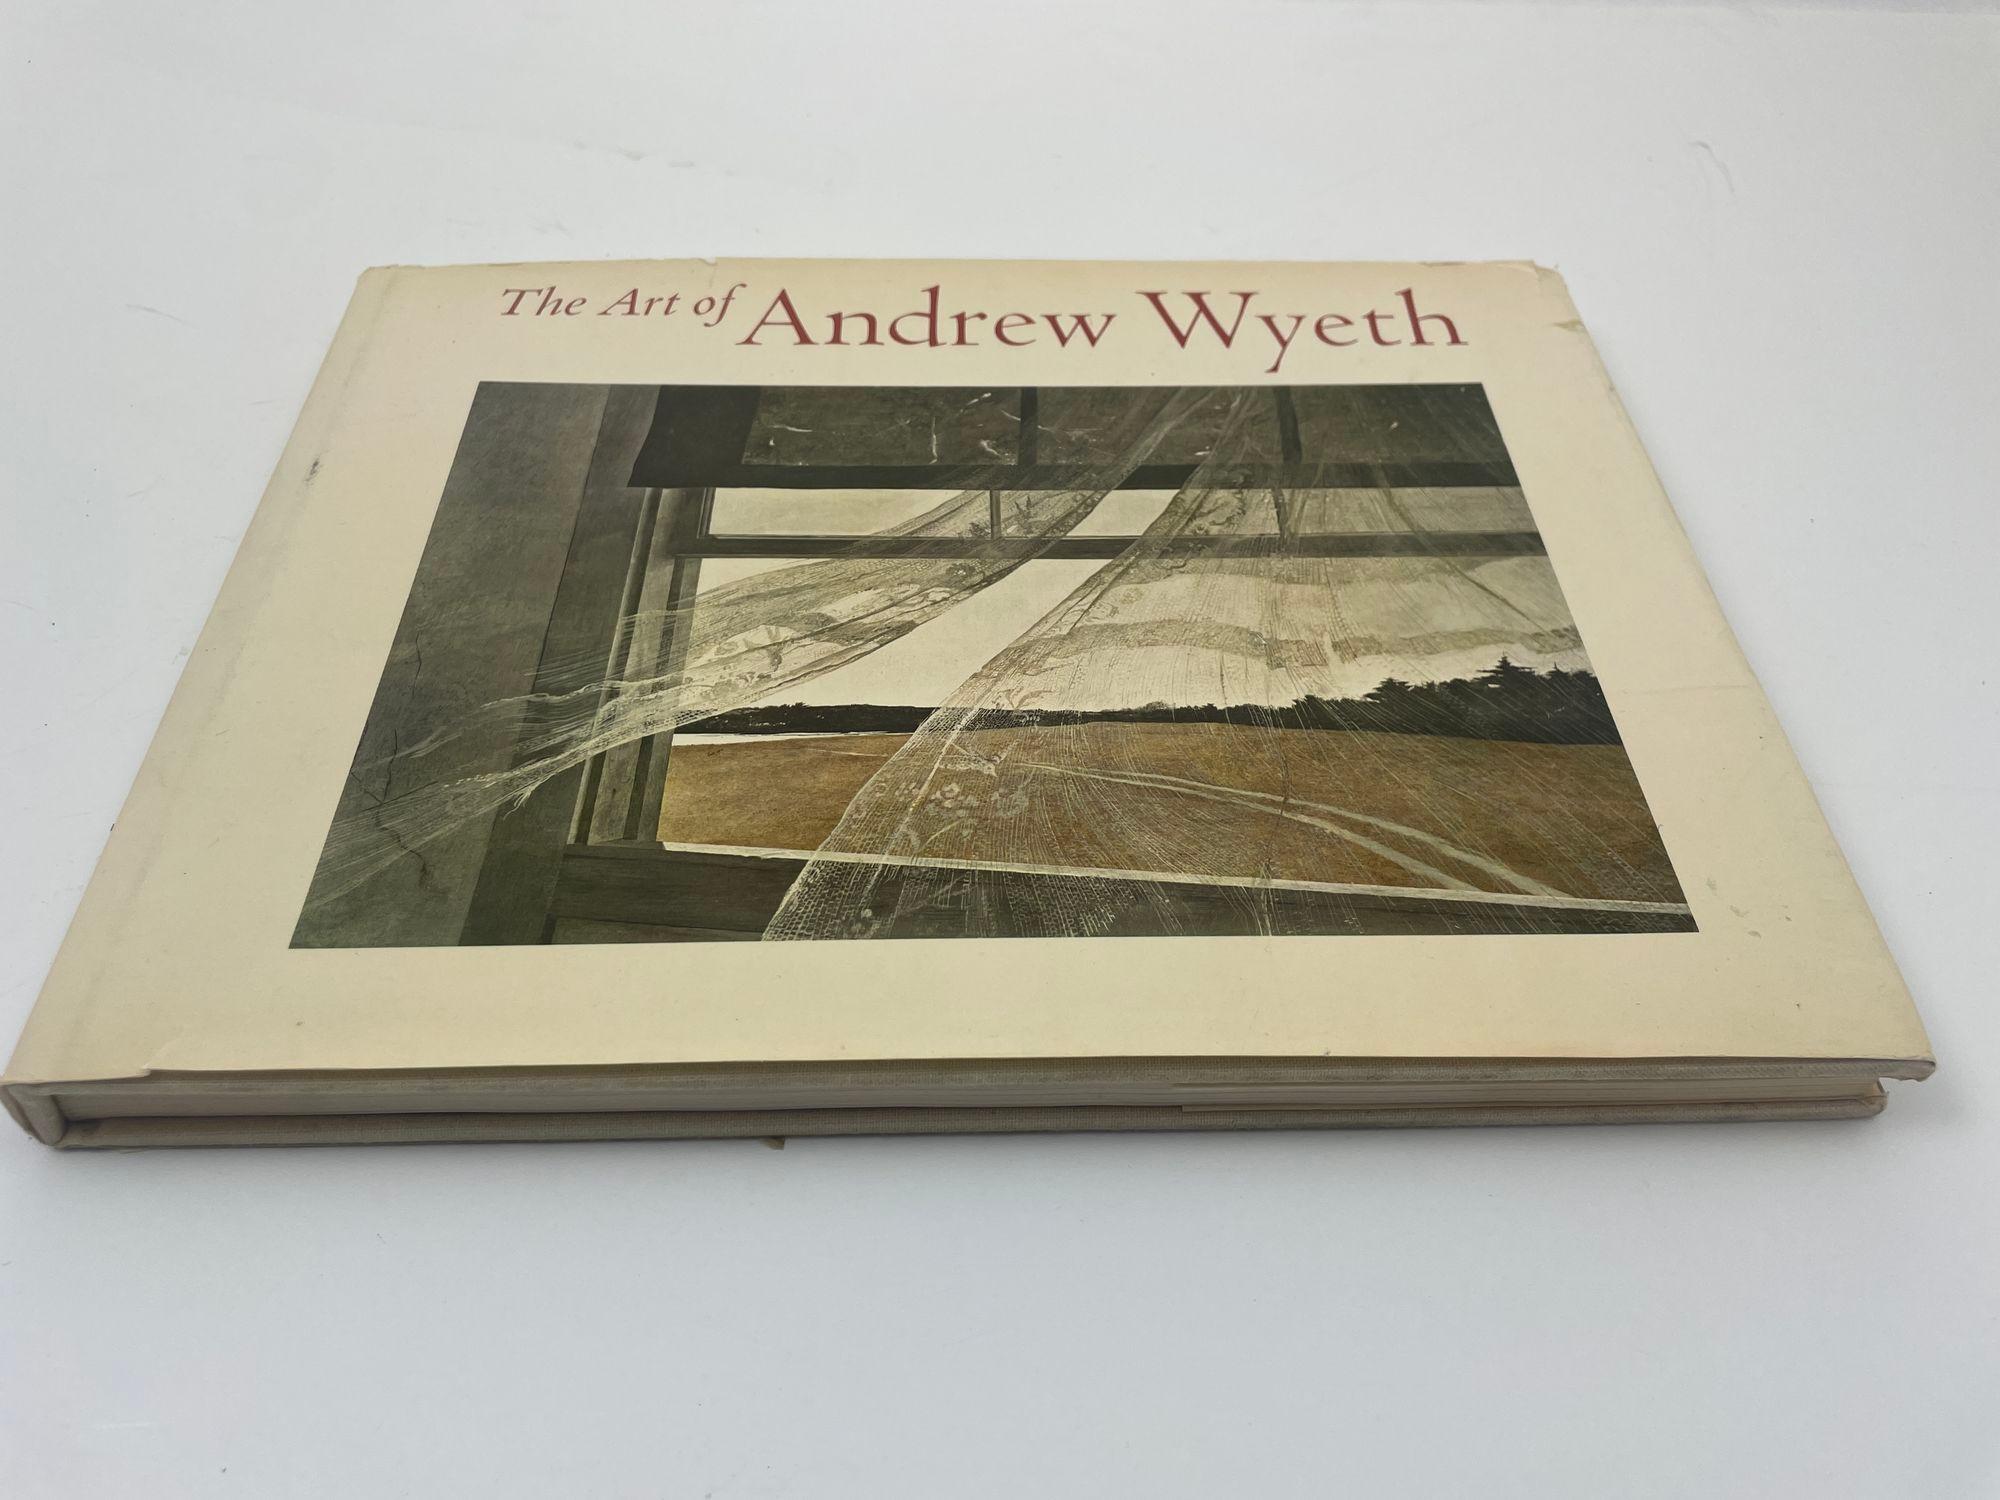 The Art of Andrew Wyeth by Wanda M. Corn hardcover book.
Published by The Fine Arts Museum of San Francisco.
First printing. First Edition: 1973.
Language ‏ : ‎ English.
Hardcover: ‎ 176 pages
Good Condition, dust cover shows some wear see